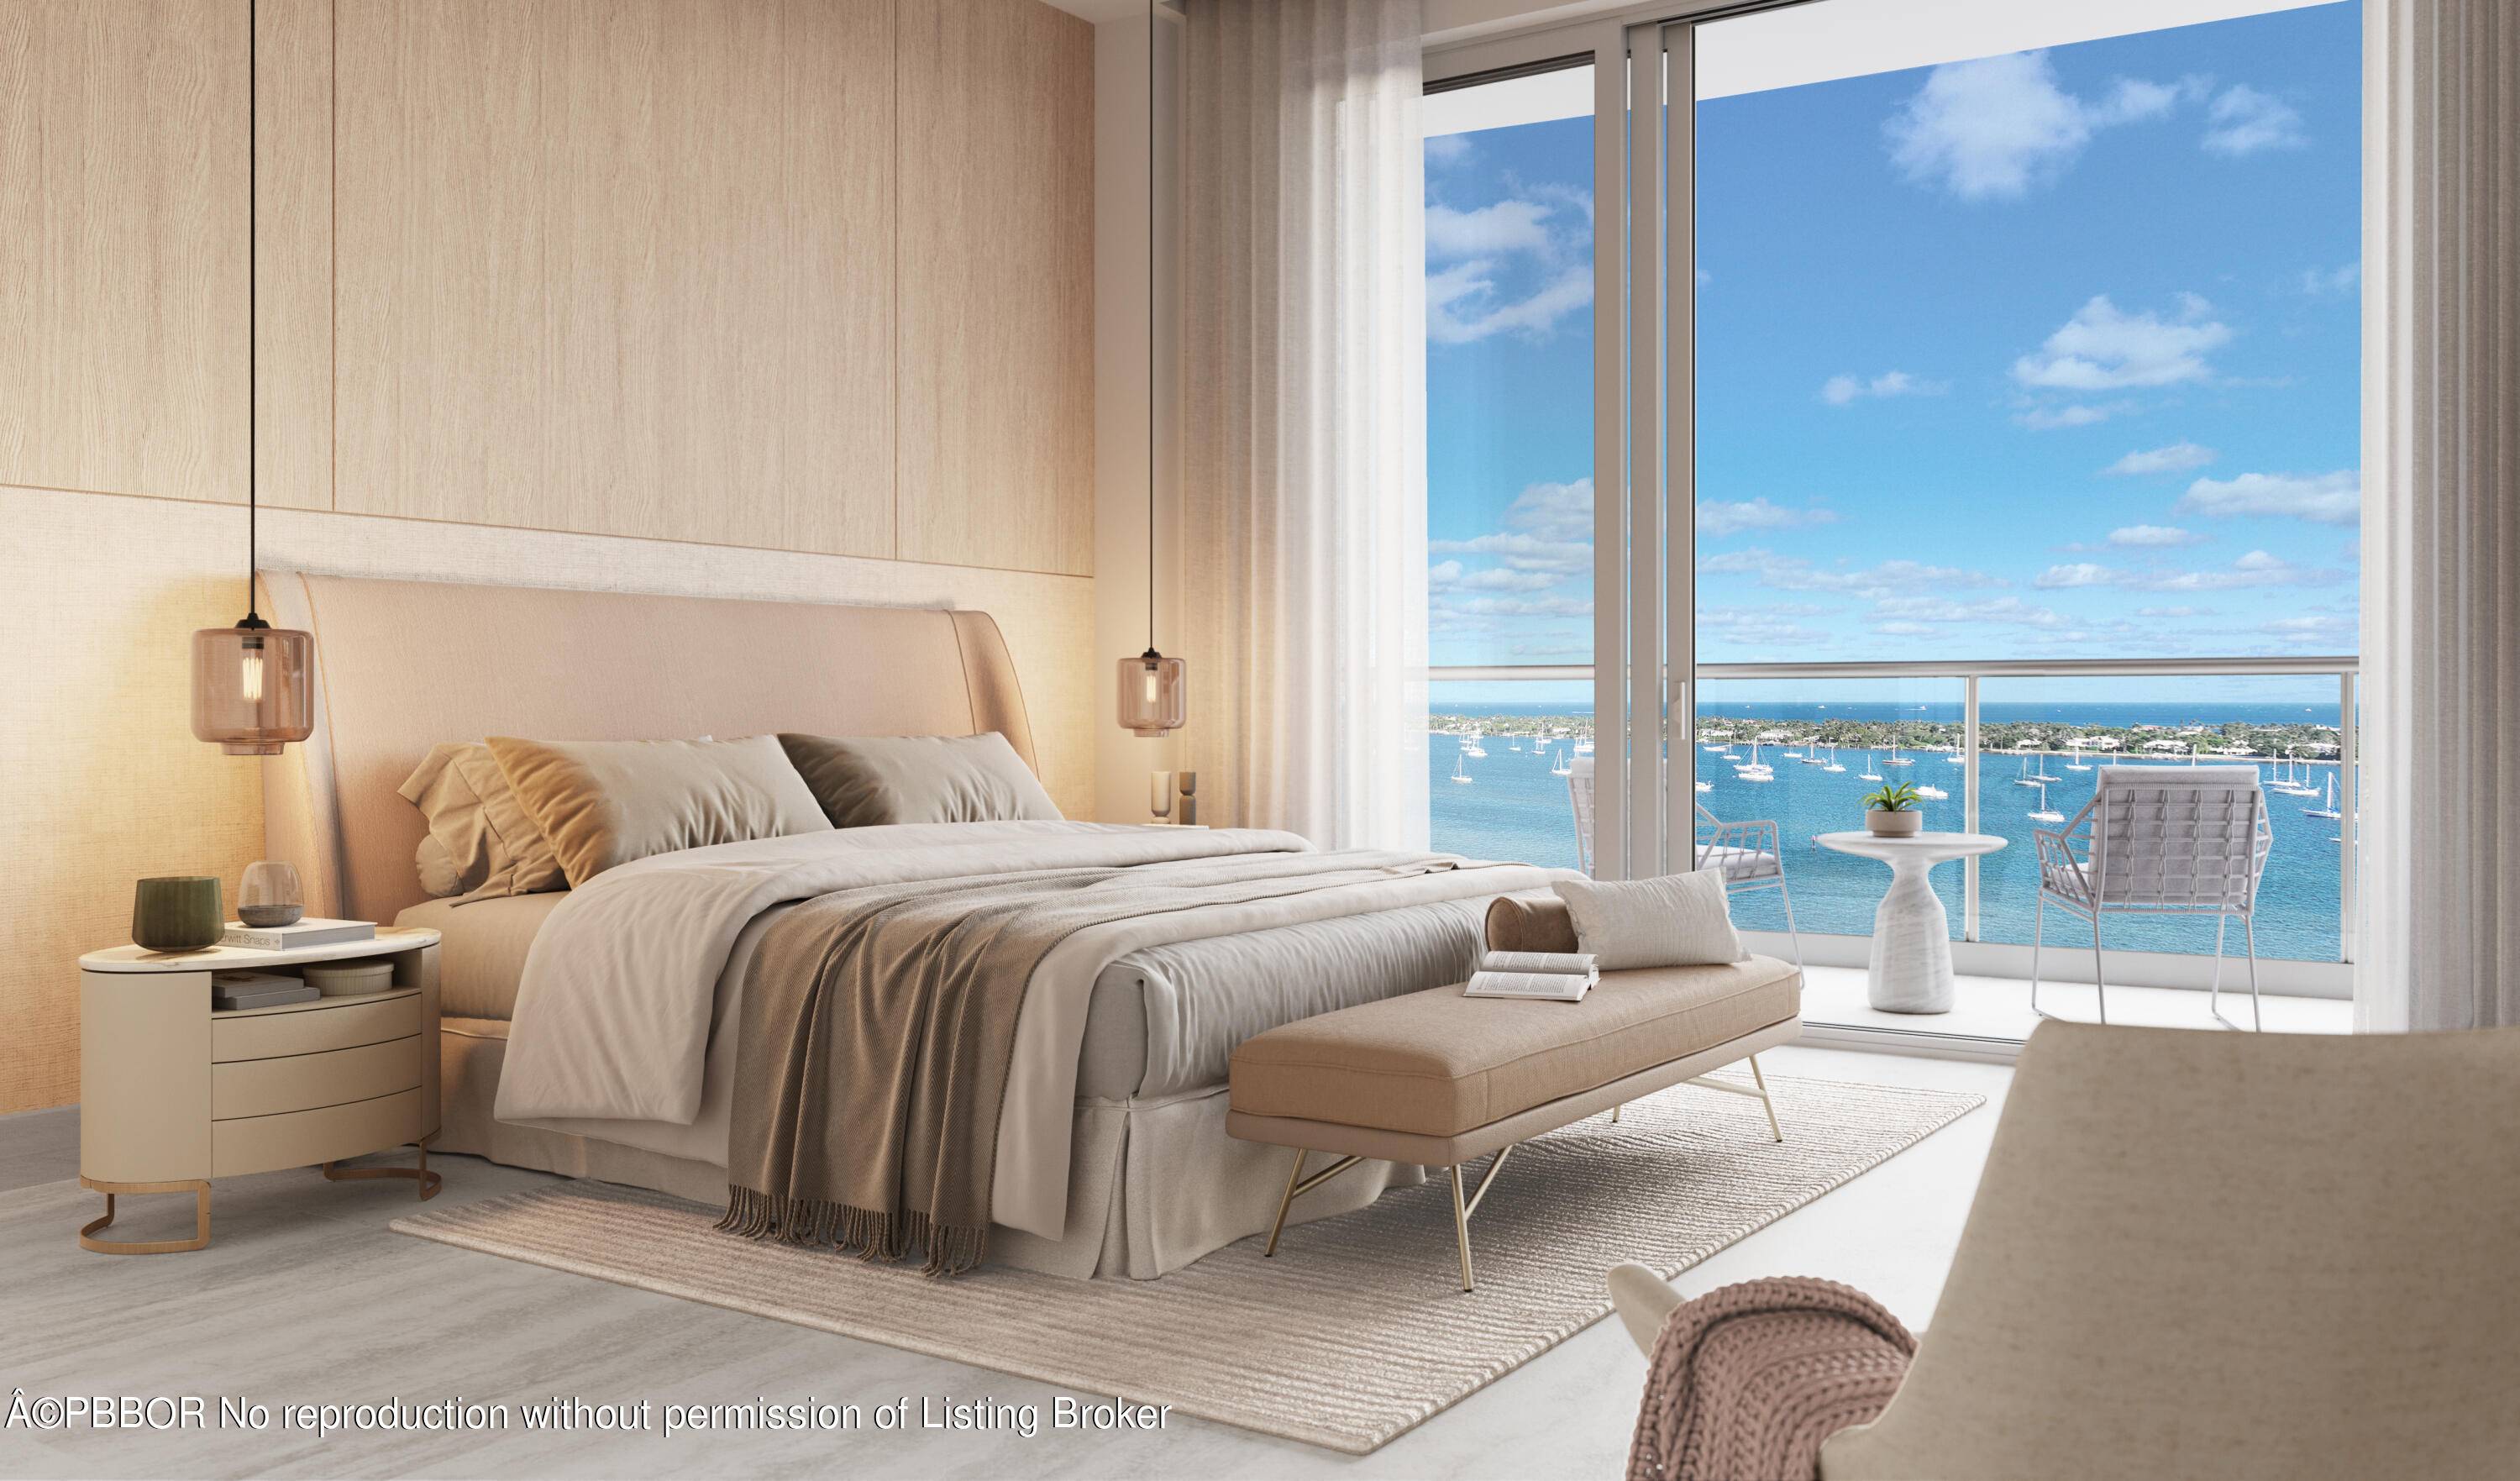 Introducing Alba, an exquisite collection of 55 luxury residences, ranging from 2 to 4 bedrooms, within a 22 story boutique direct waterfront building.